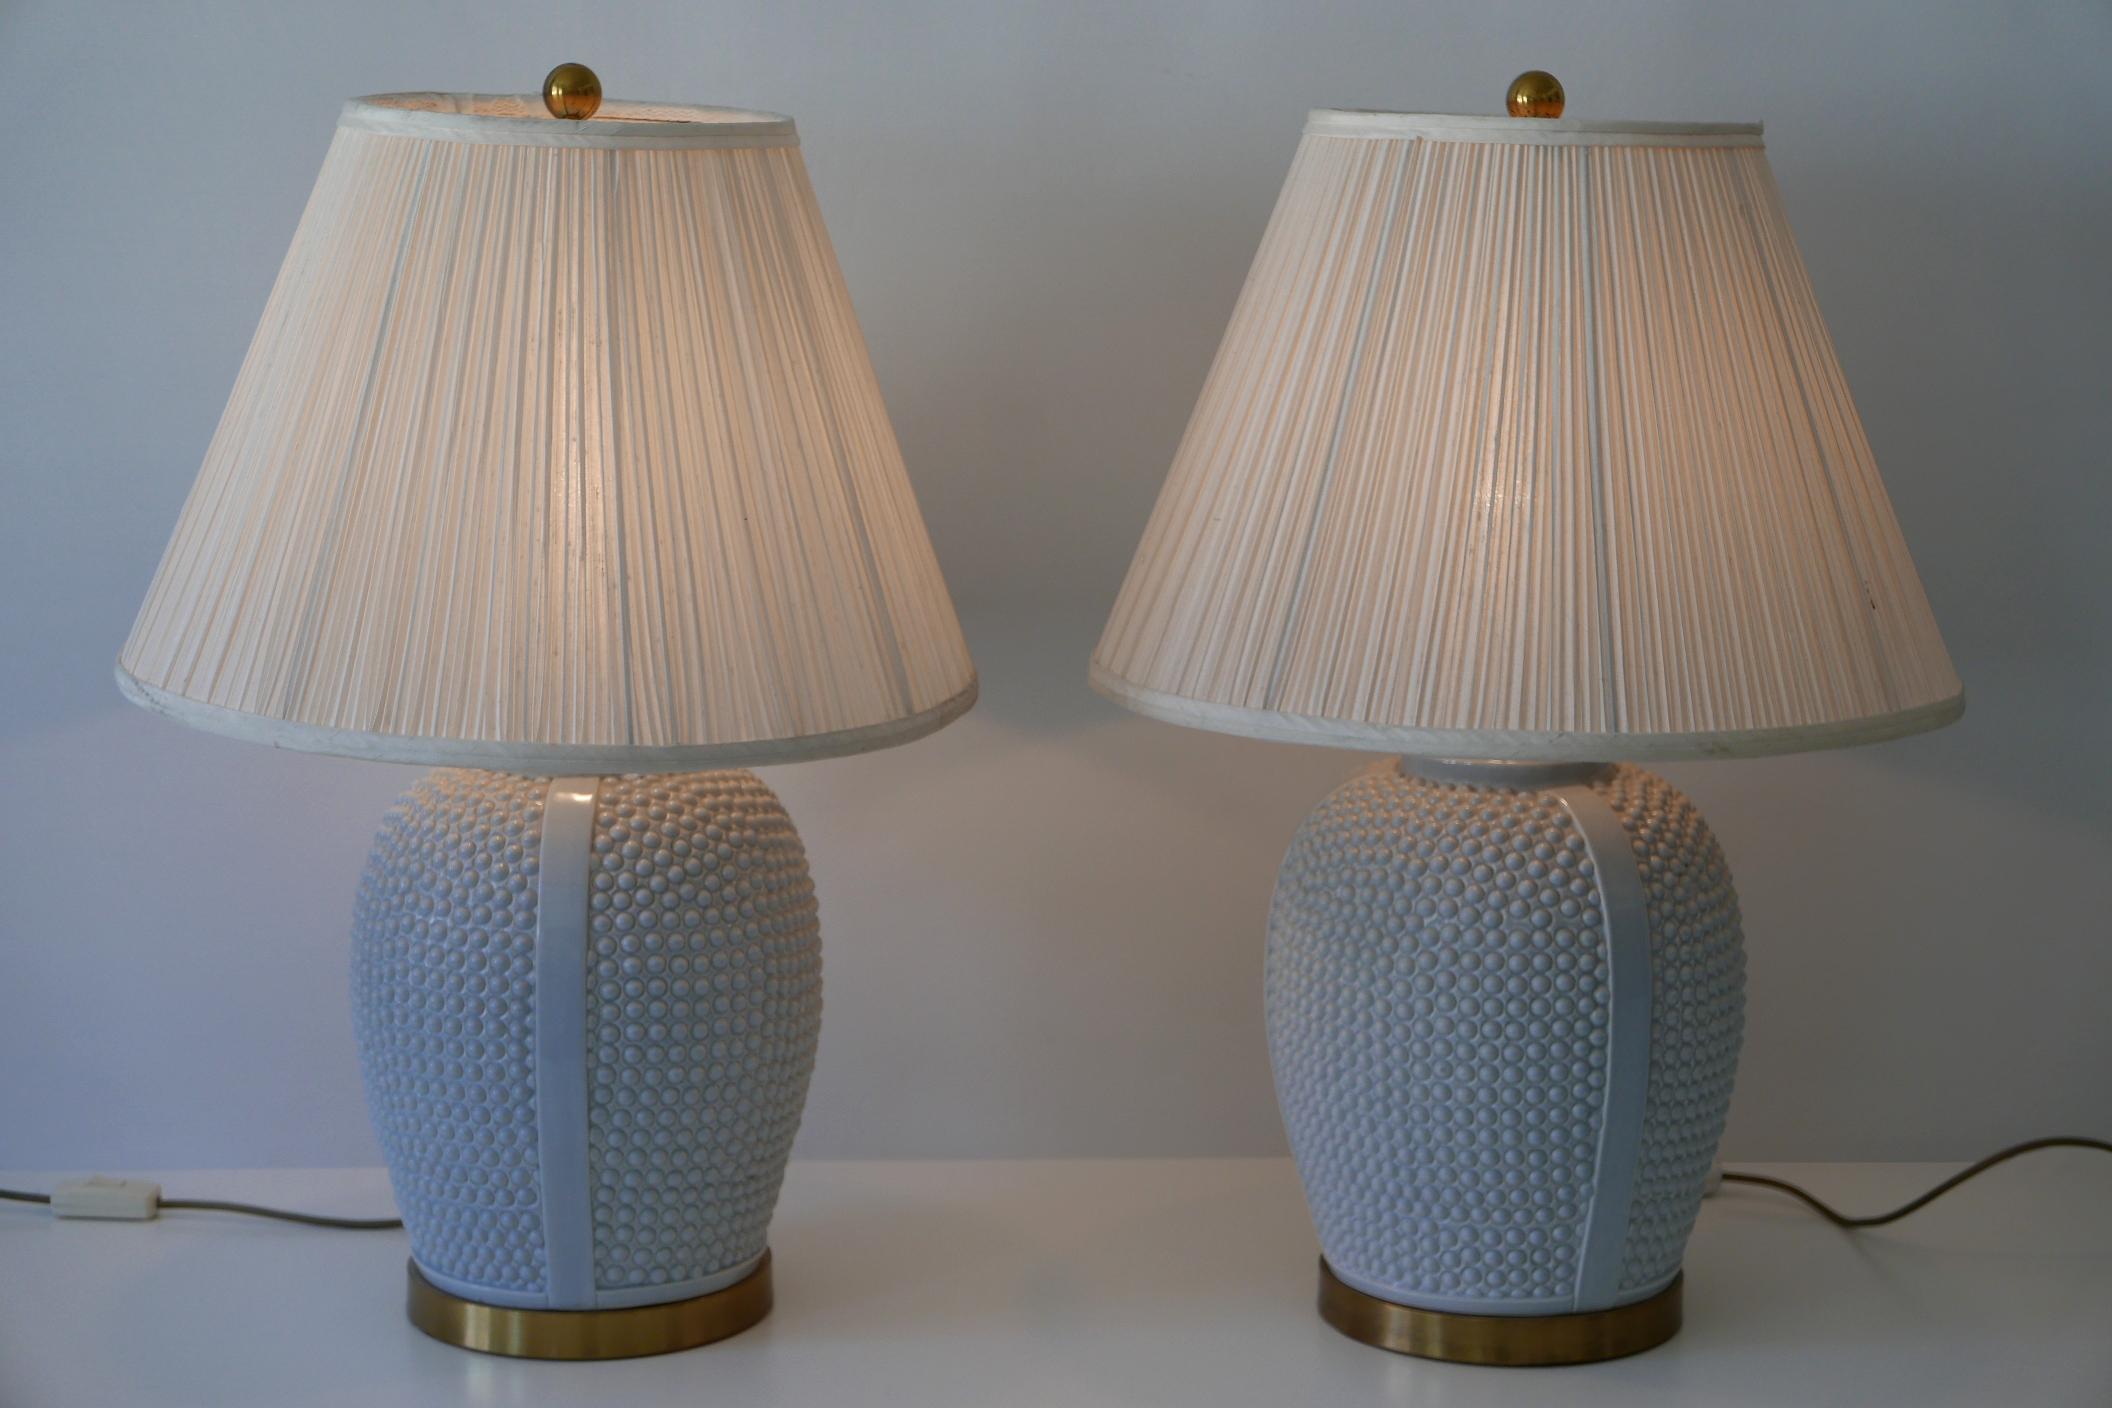 Set of Two Exceptional Mid-Century Modern Ceramic Table Lamps, 1960s, Germany For Sale 3